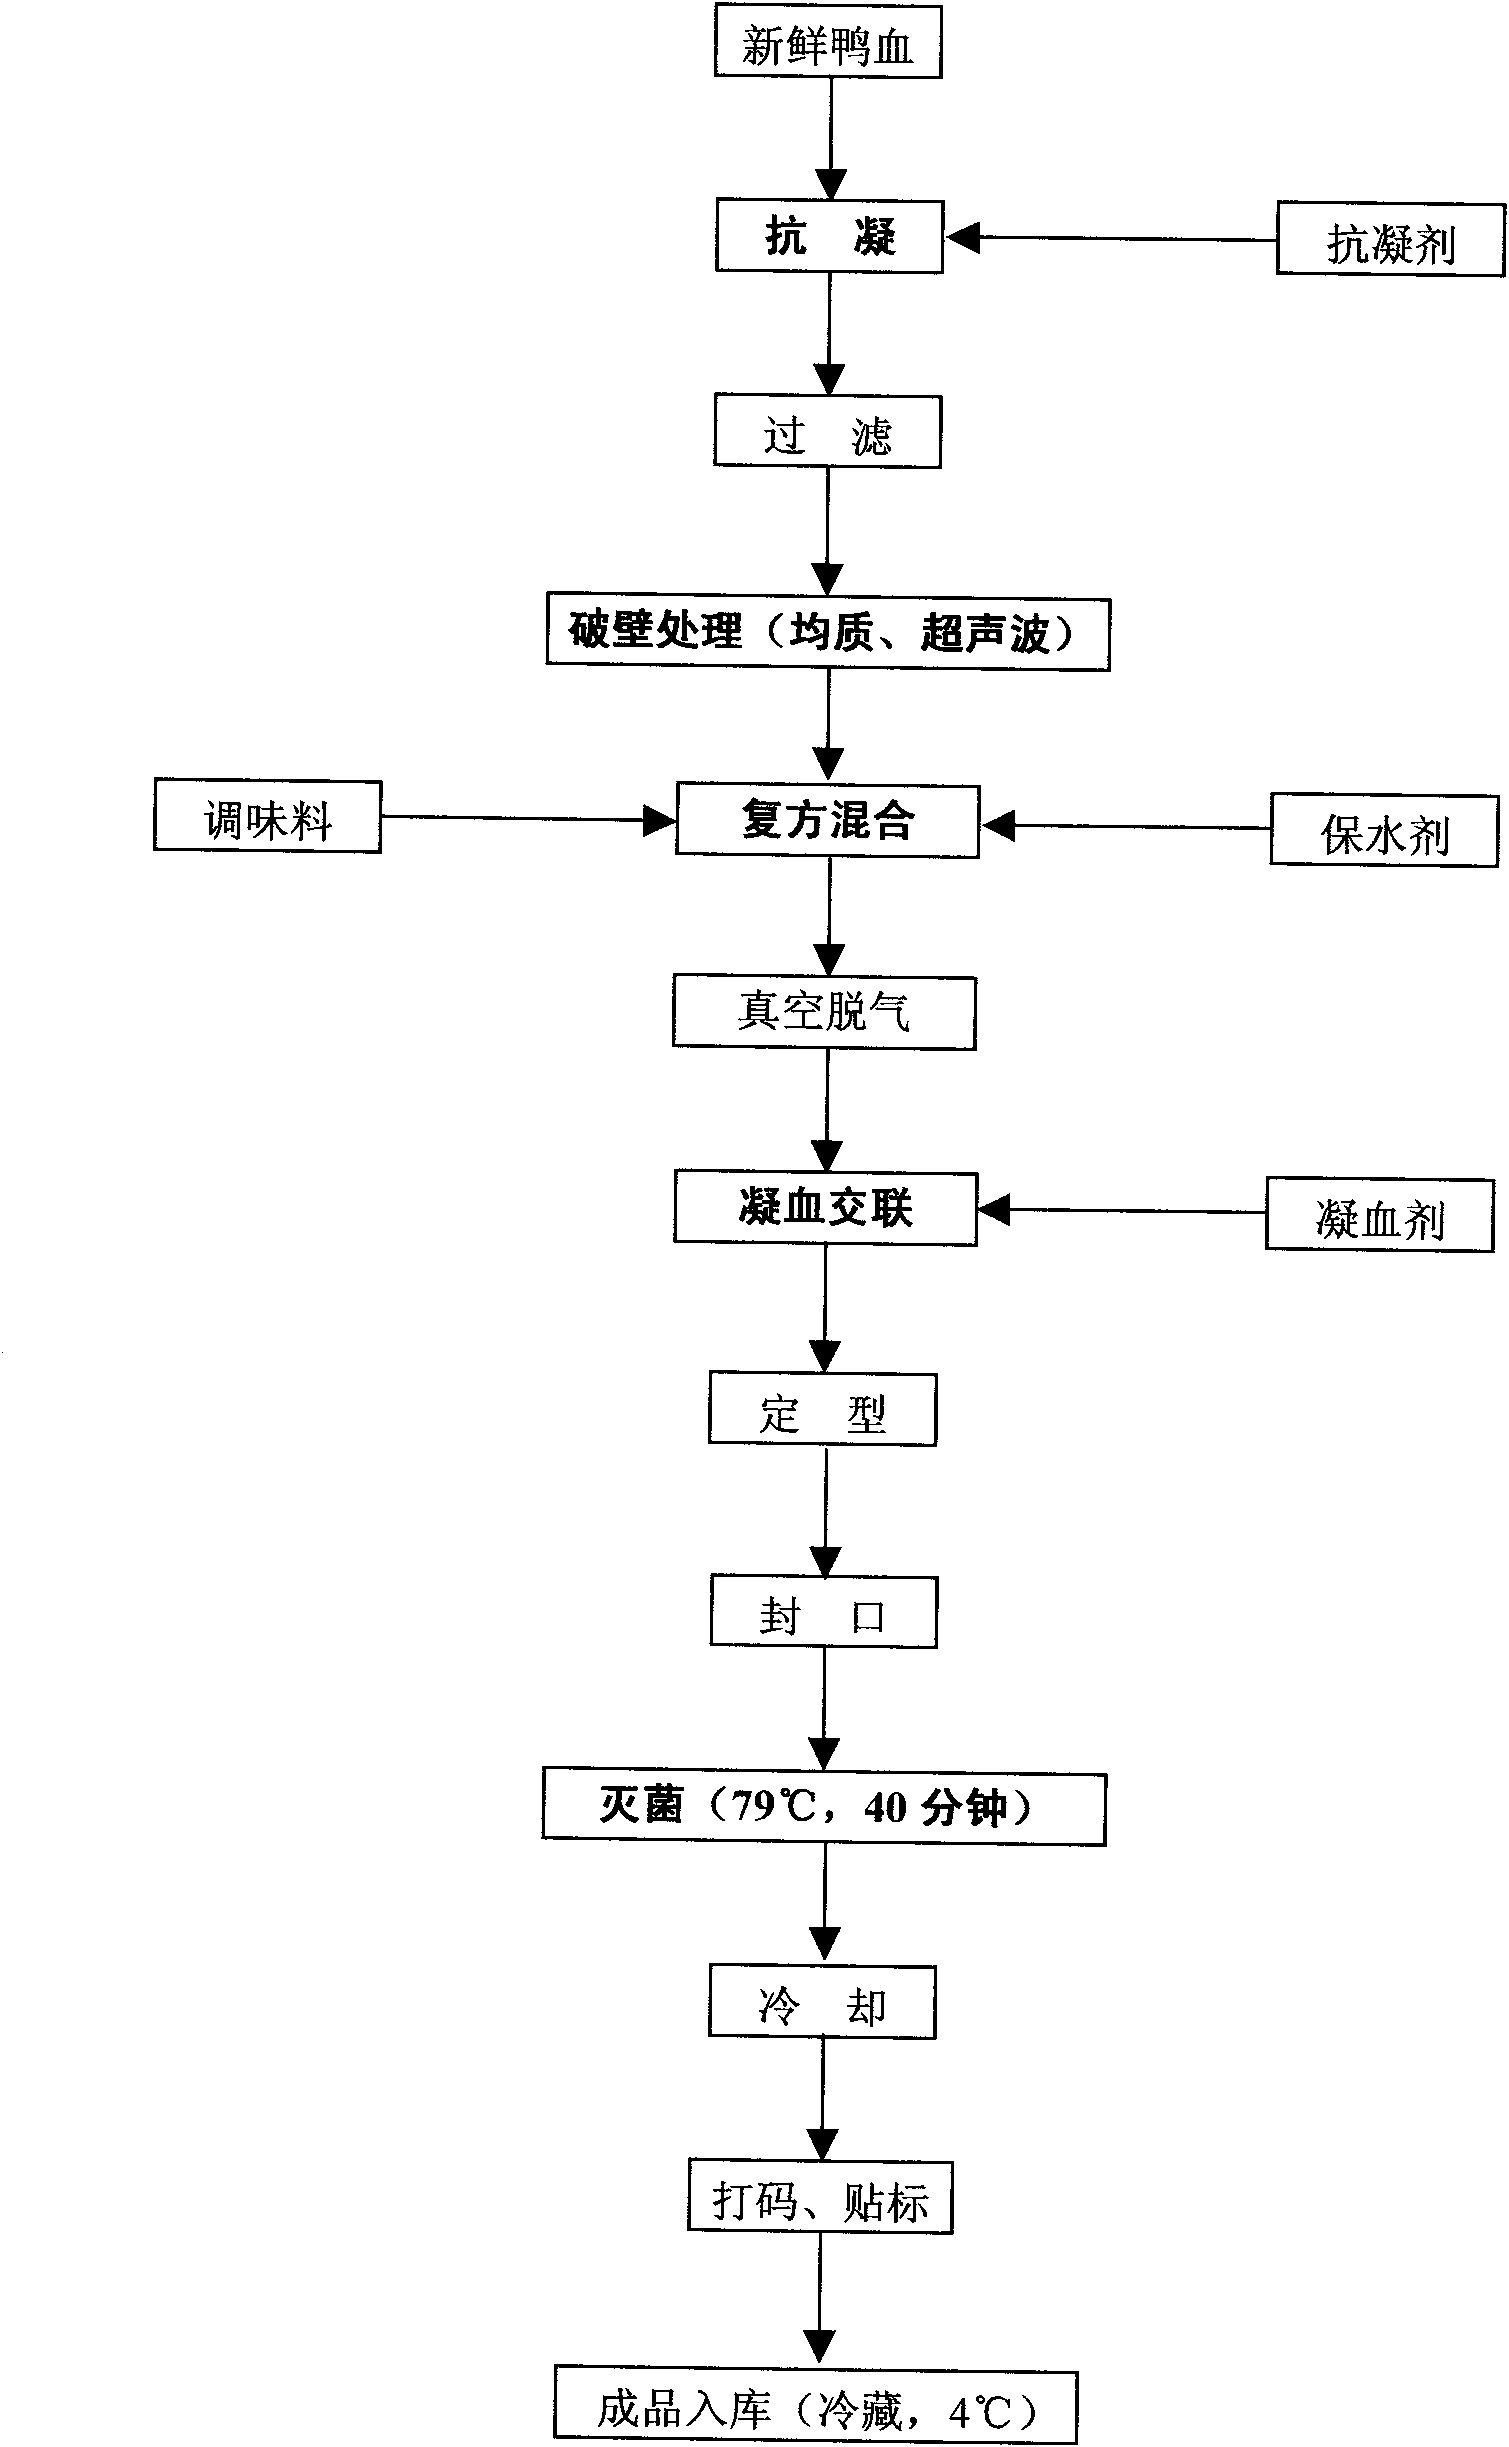 Method for producing composite bean curd with duck blood